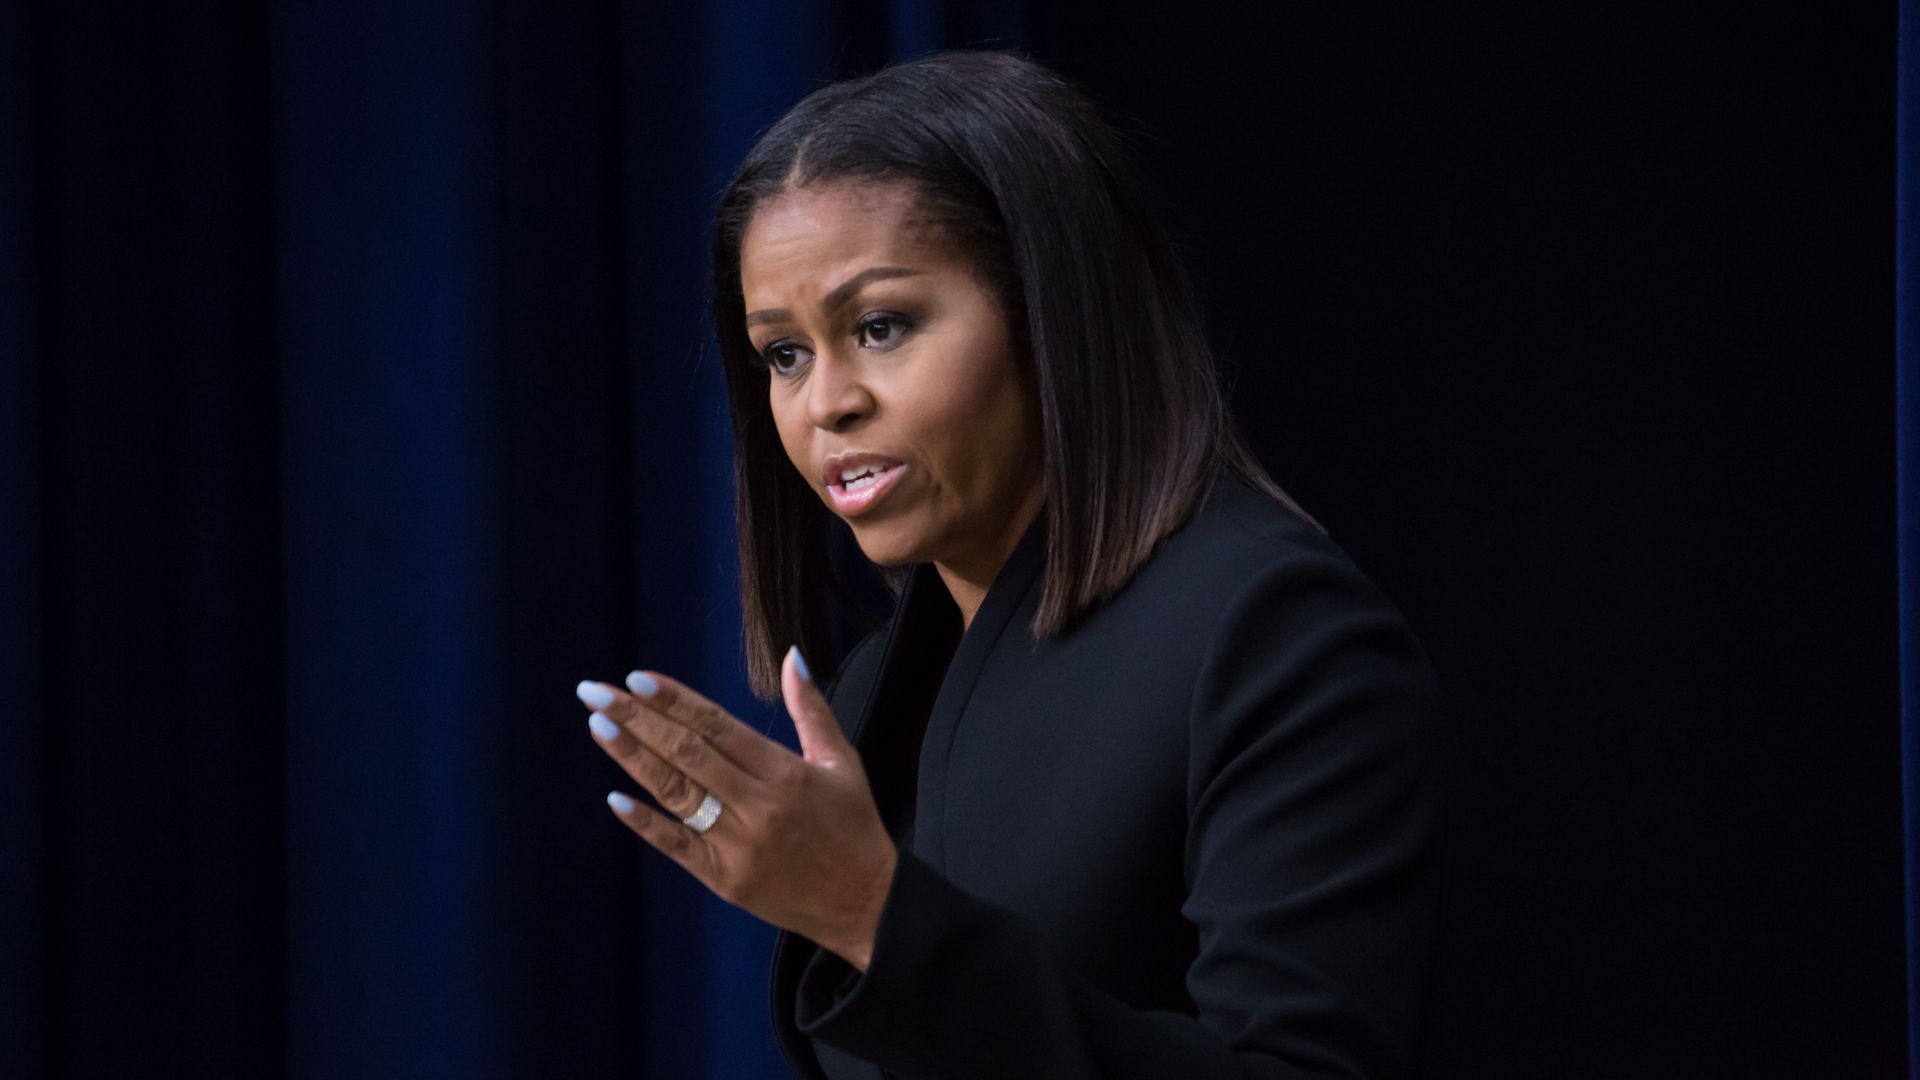 Former First Lady Michelle Obama. Photo: Cheriss May/NurPhoto via Getty Images